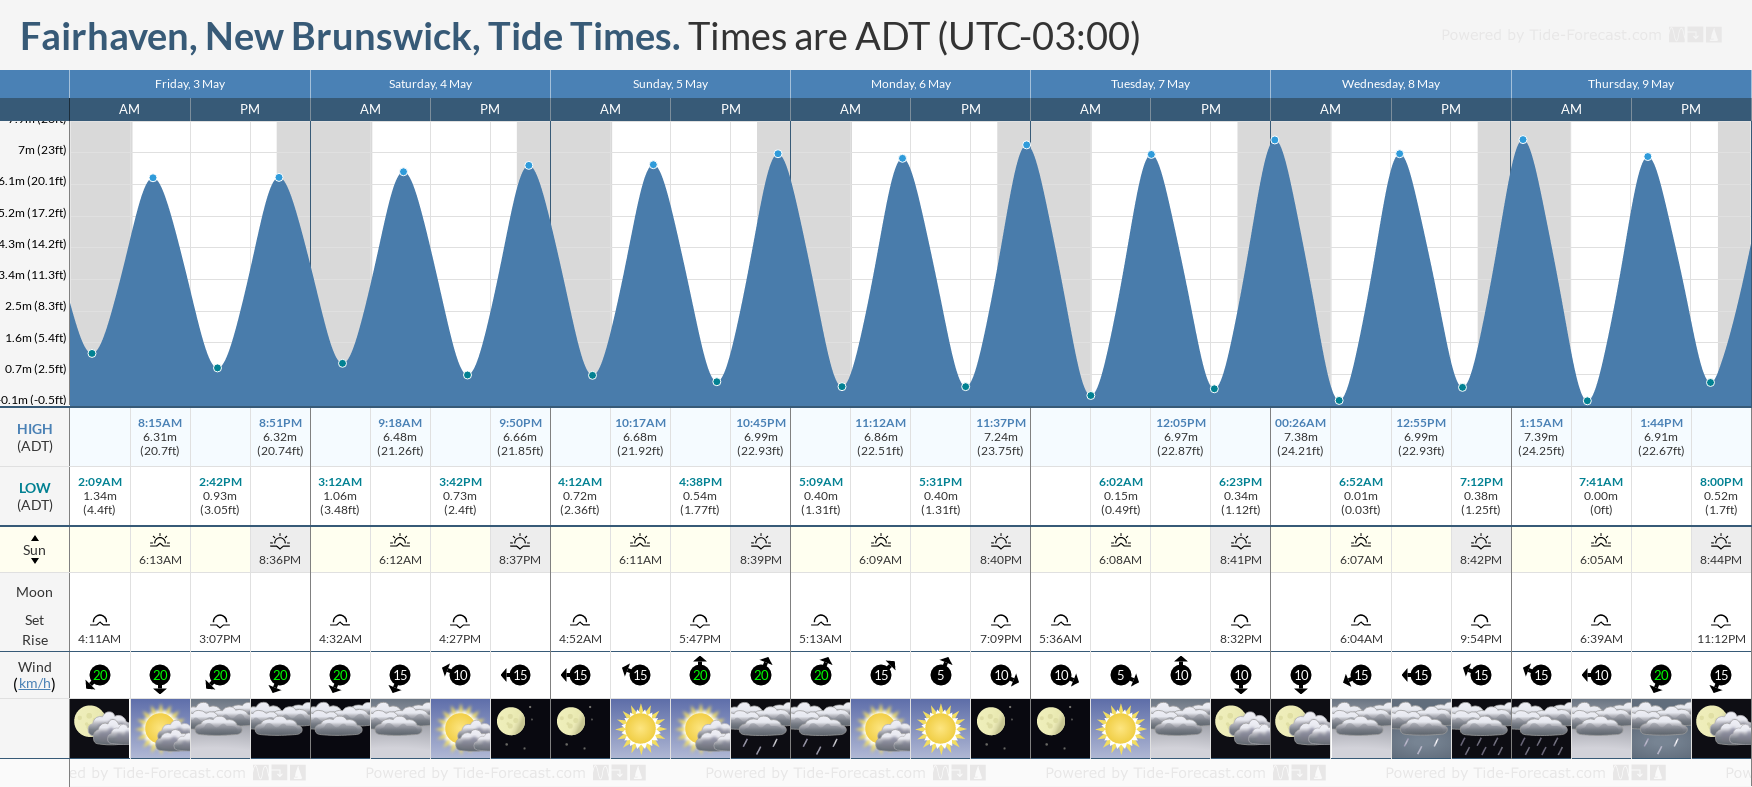 Fairhaven, New Brunswick Tide Chart including high and low tide times for the next 7 days